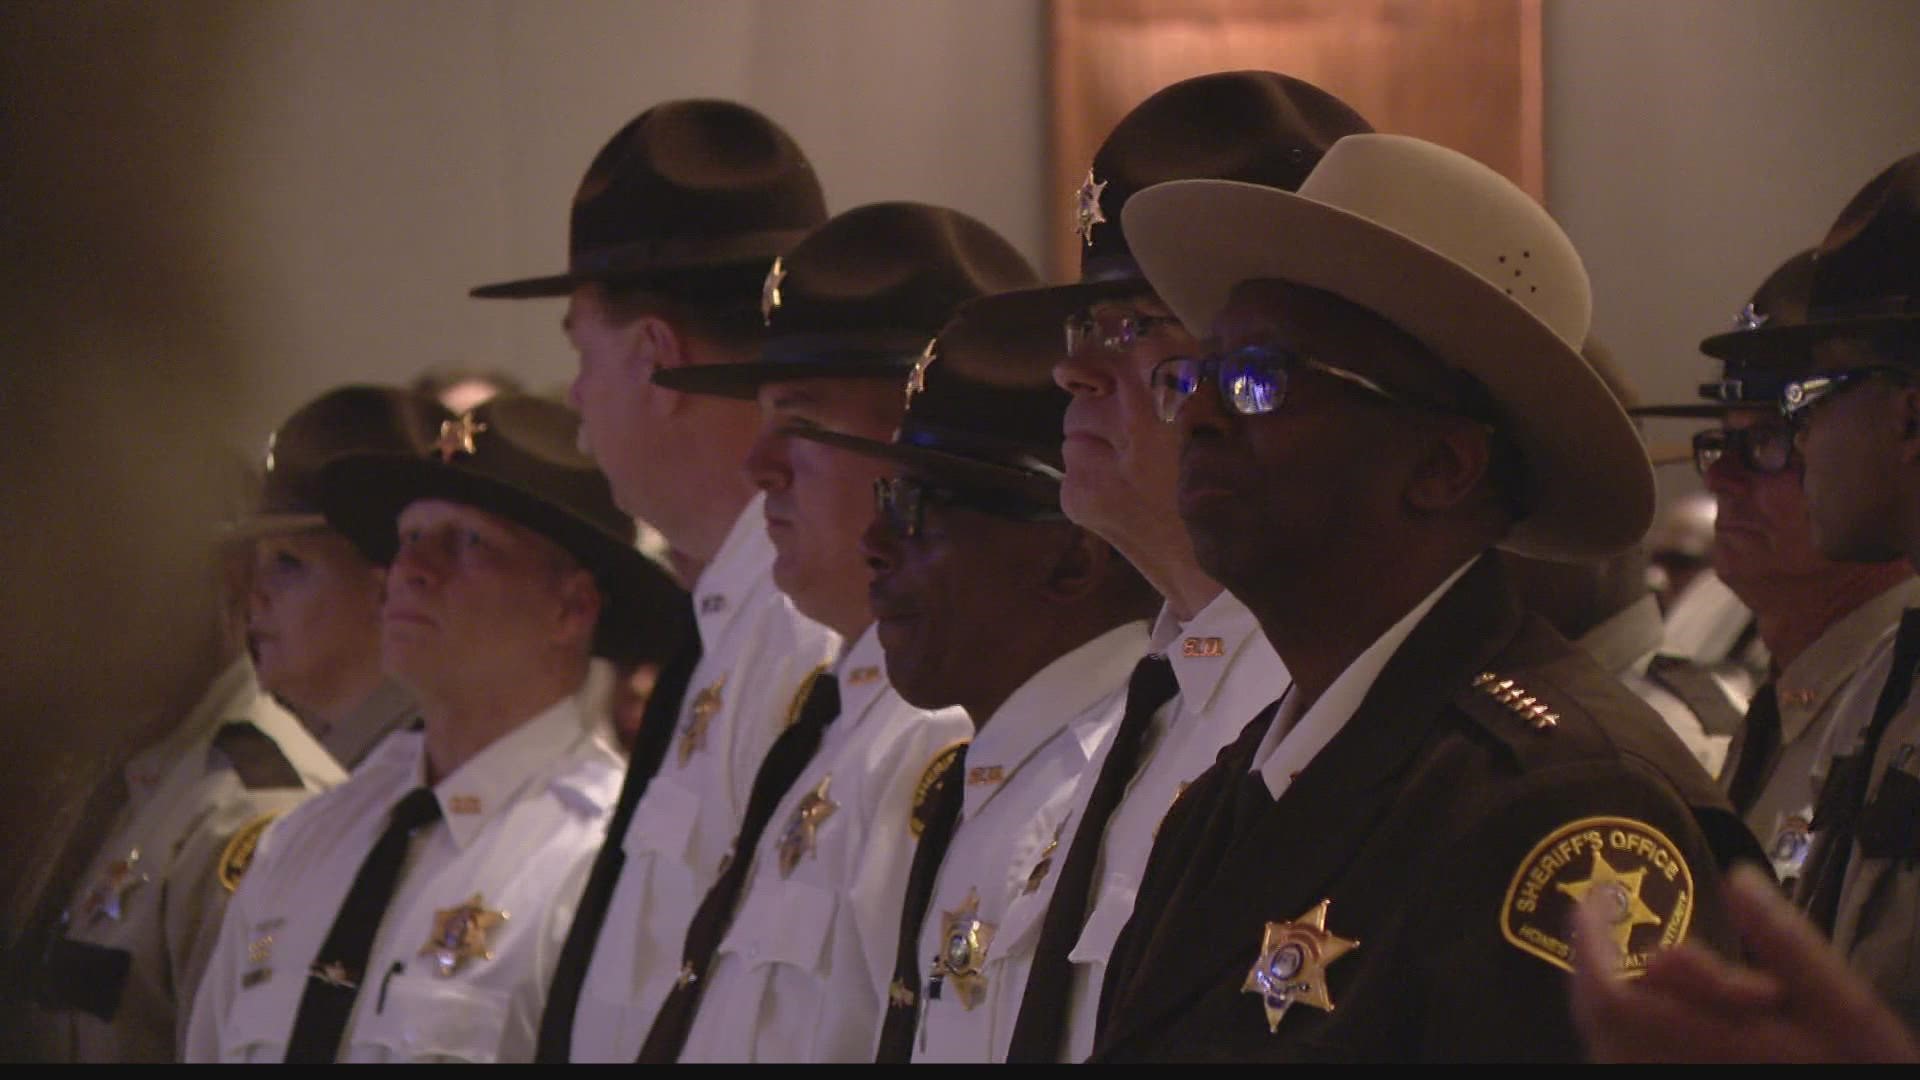 Sheriff Vernon Betts said he and his certified-trained team are prepared to help St. Louis police keep downtown a safer place.